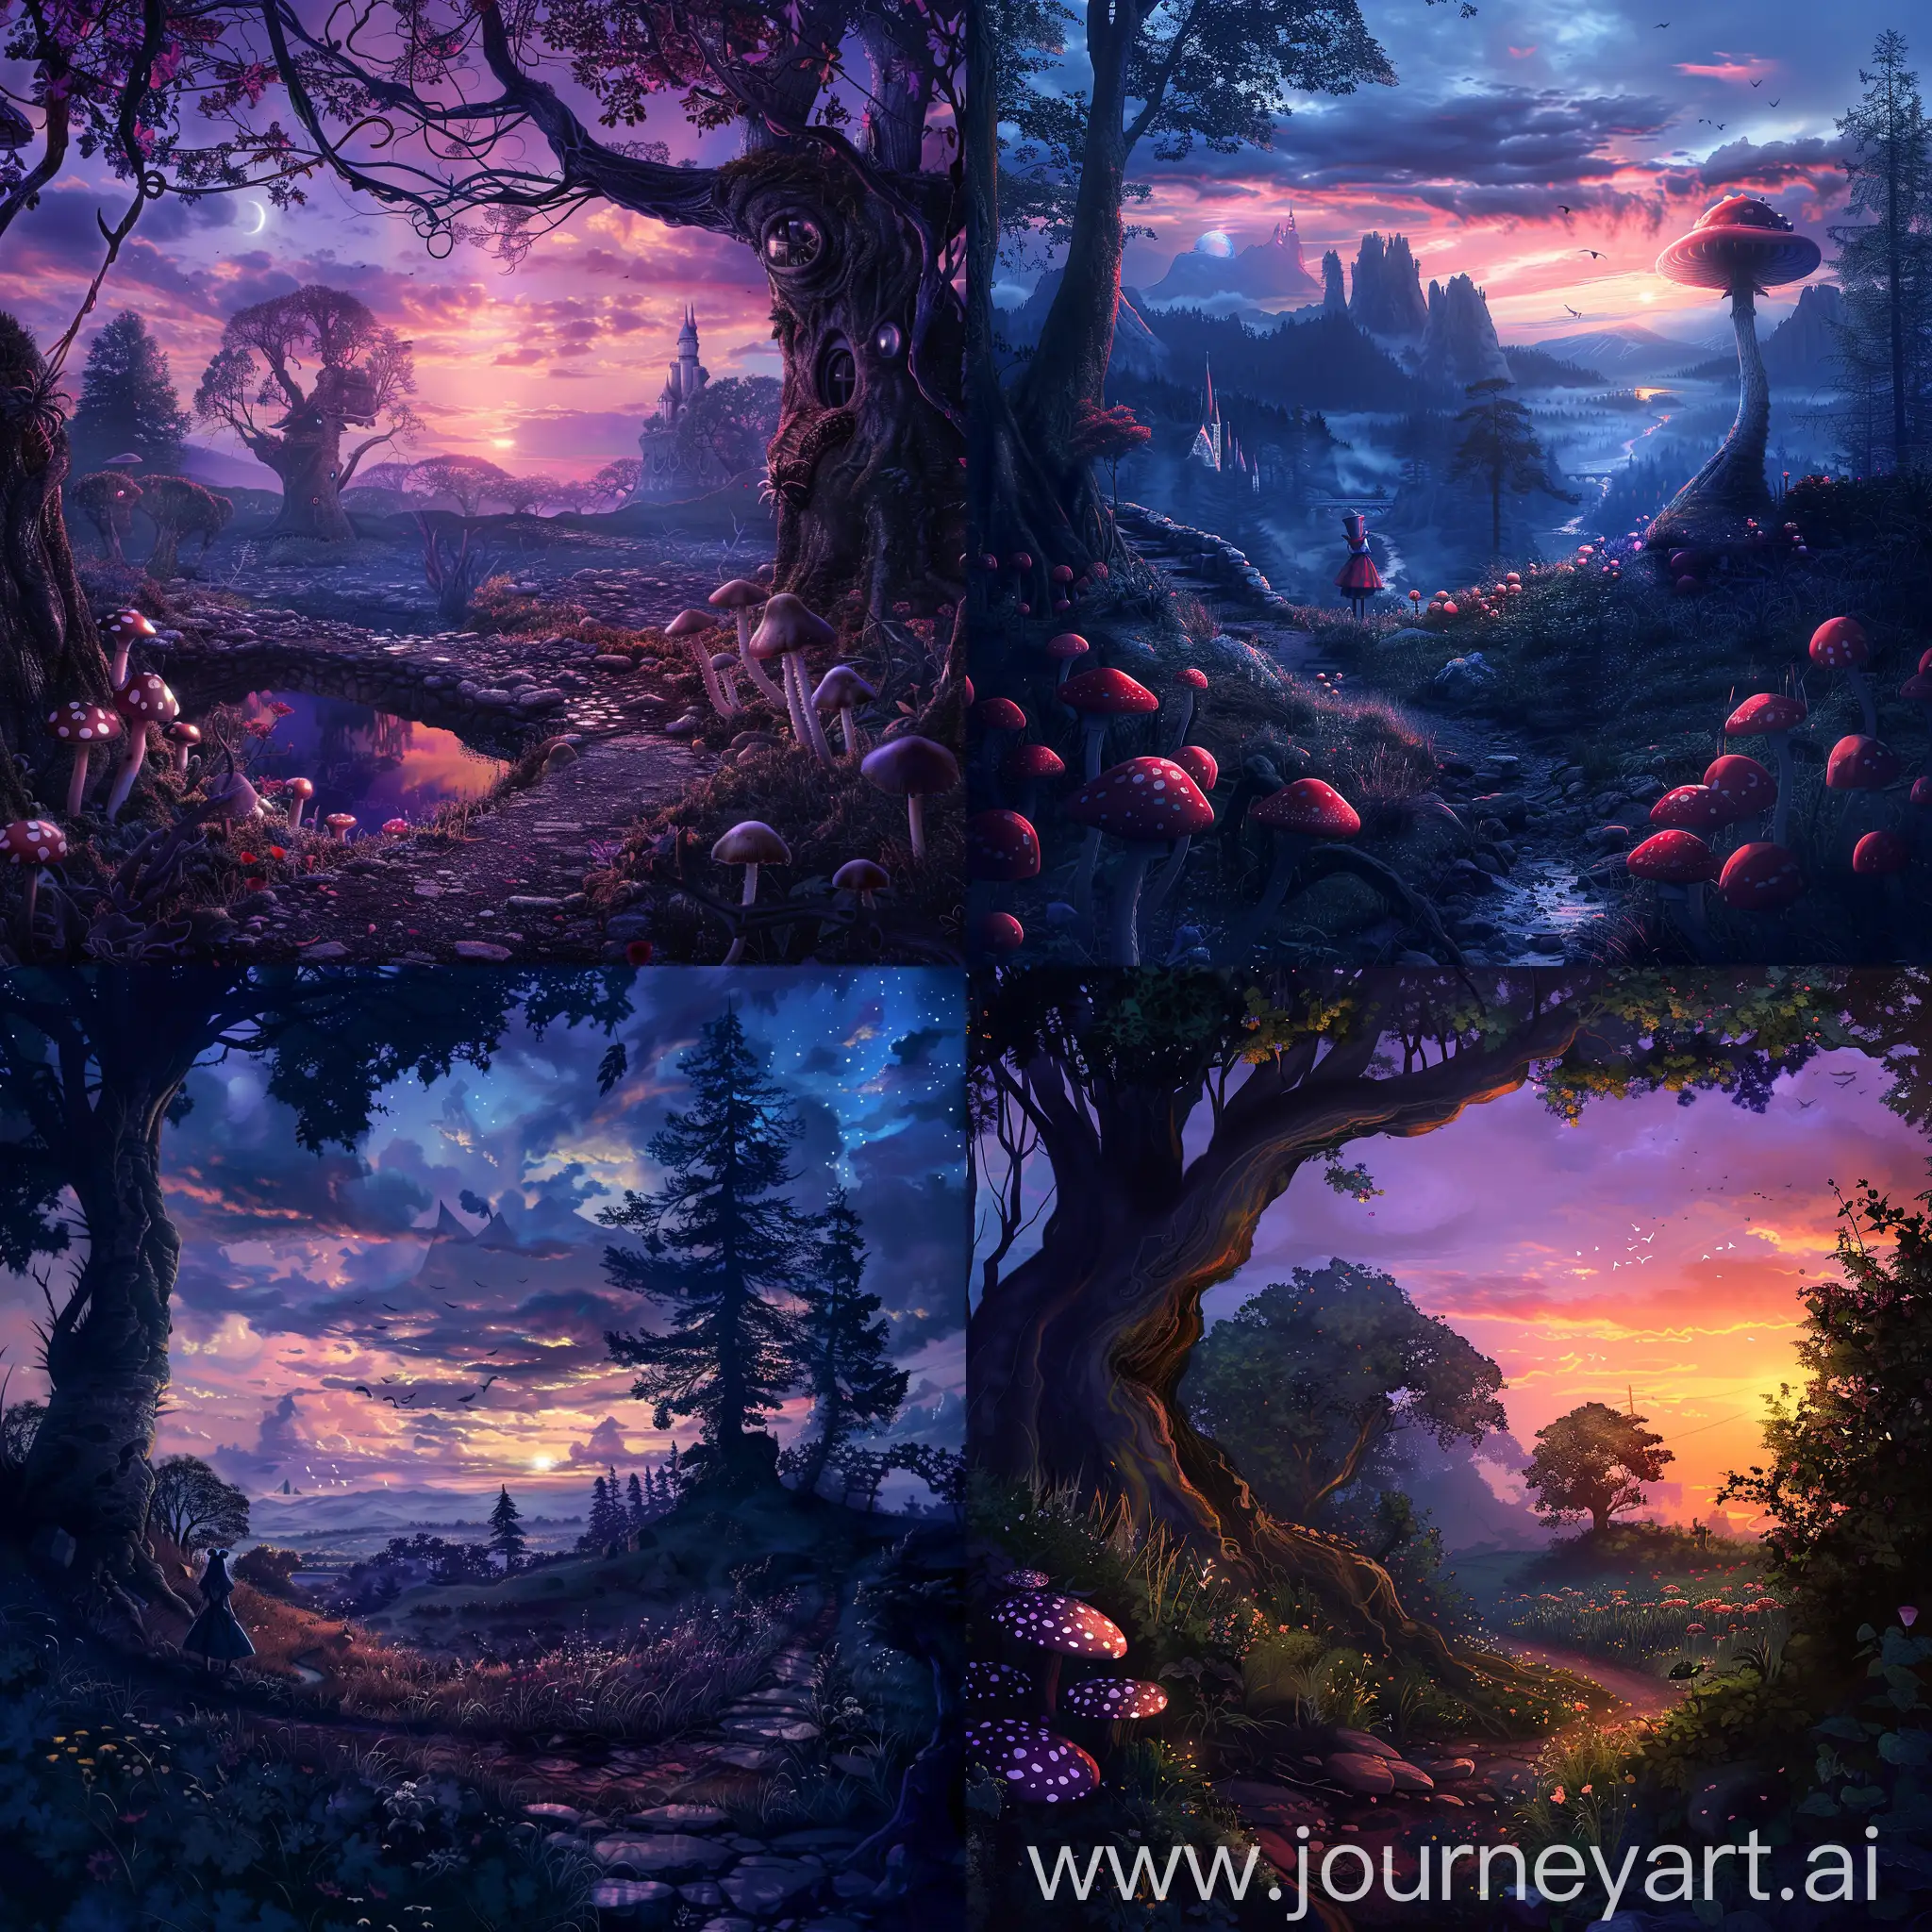 Alice in Wonderland type landscape without any character, twilight, high resolution